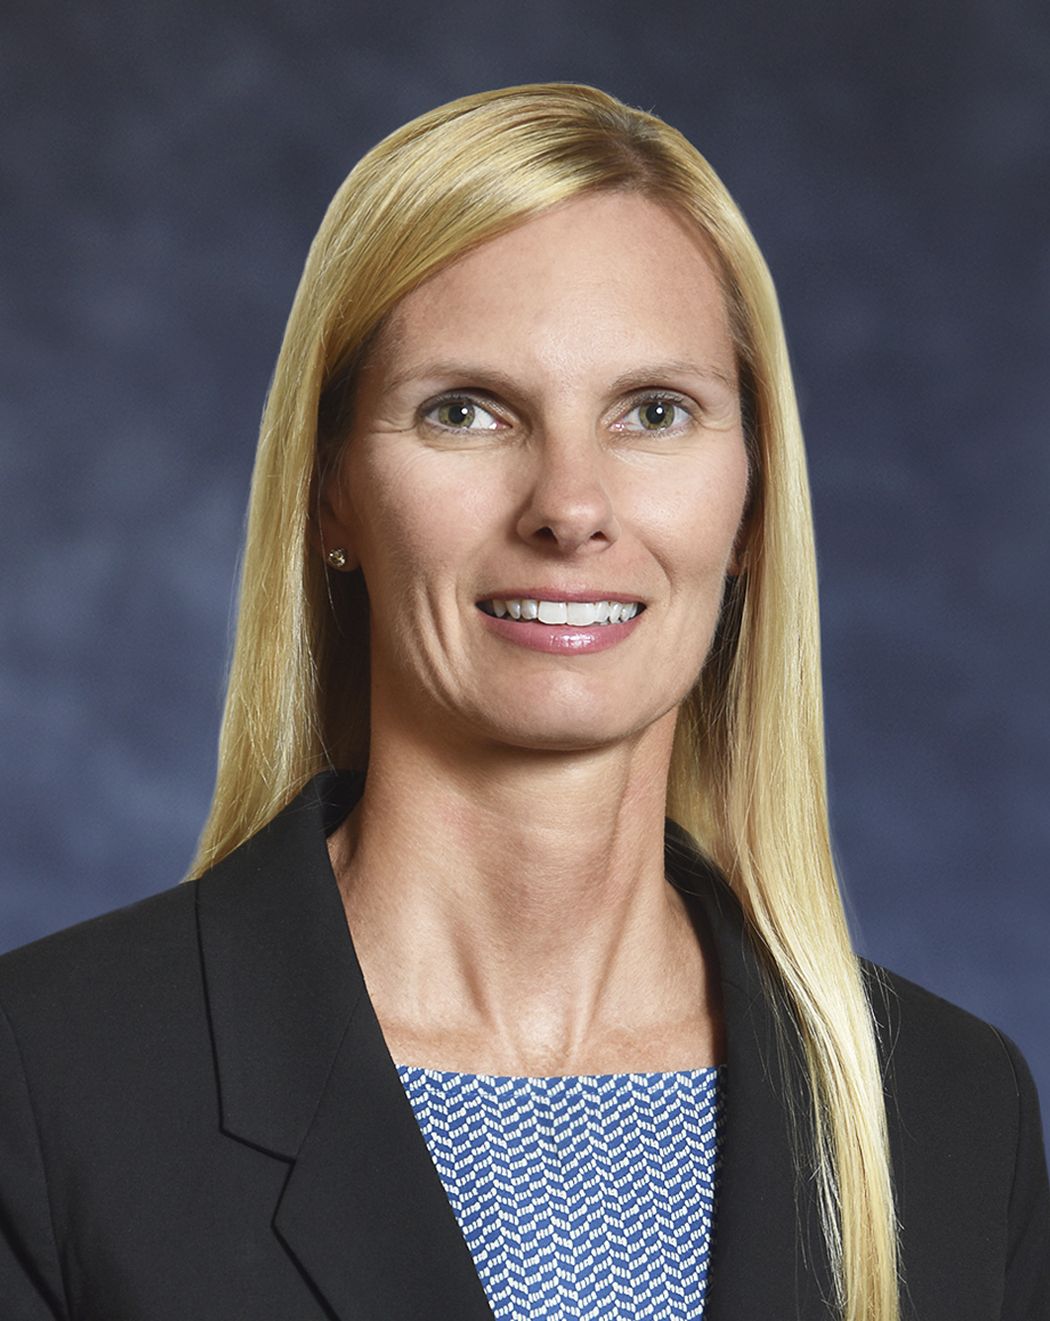 Janet Rilling, CFA, is a senior portfolio manager and head of the Multi-Sector Fixed Income – Plus and High Yield team at Wells Fargo Asset Management